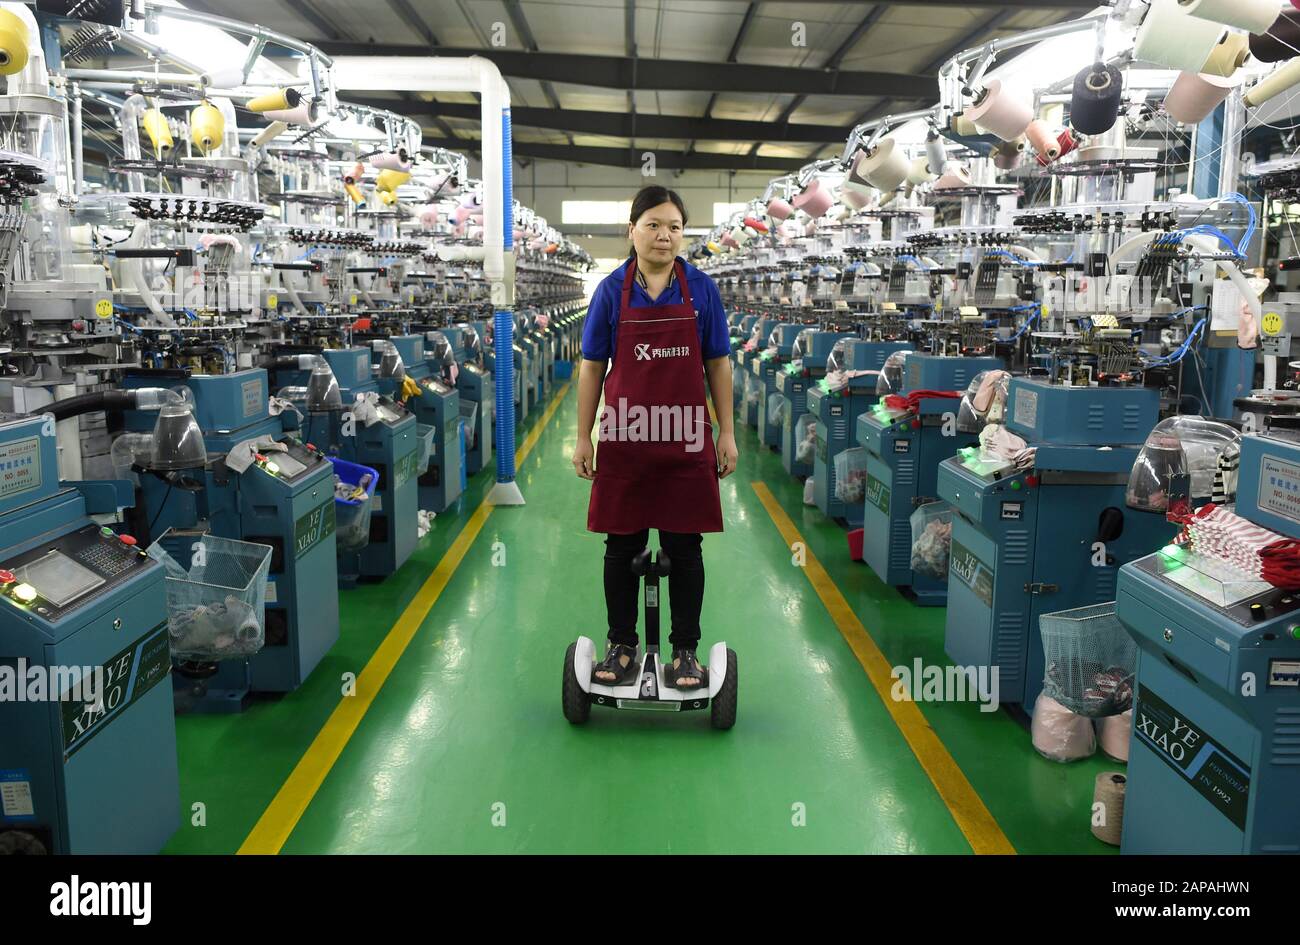 (200122) -- HANGZHOU, Jan. 22, 2020 (Xinhua) -- A worker inspects machines at a smart workshop of a hosiery company in Zhuji, east China's Zhejiang Province, Oct. 23, 2019. TO GO WITH 'Xinhua Headlines: Economic powerhouse leads legislation in beefing up private sector' (Xinhua/Han Chuanhao) Stock Photo